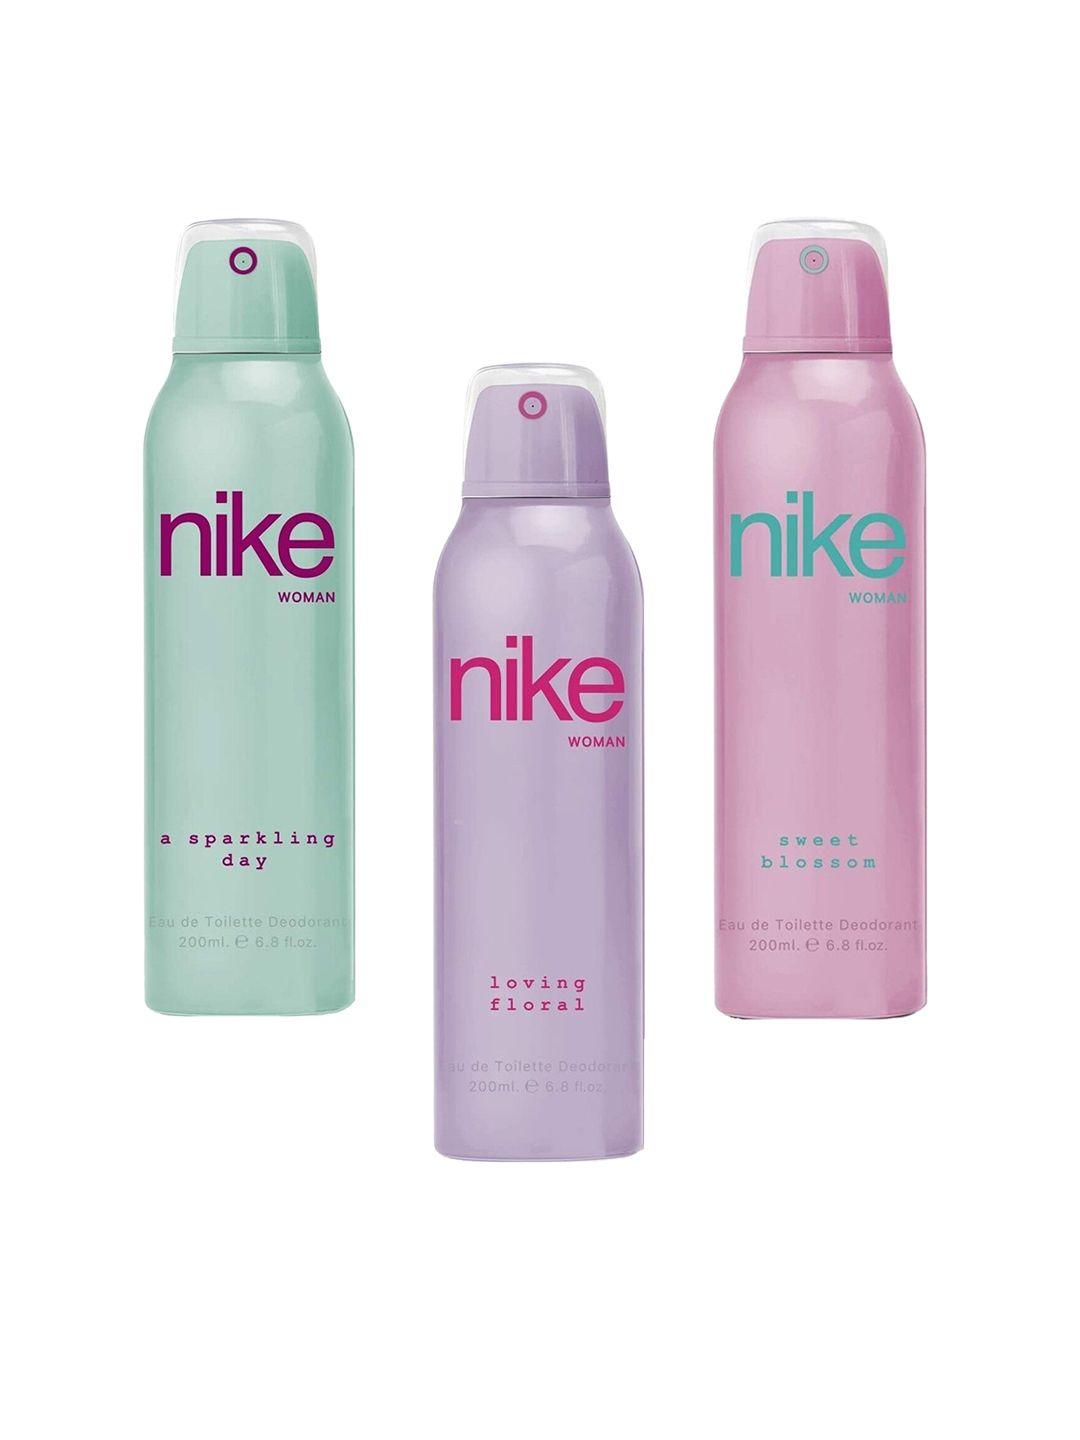 nike pack of 3 woman a sprakling day, loving floral & sweet blossom deodorant- 200ml each